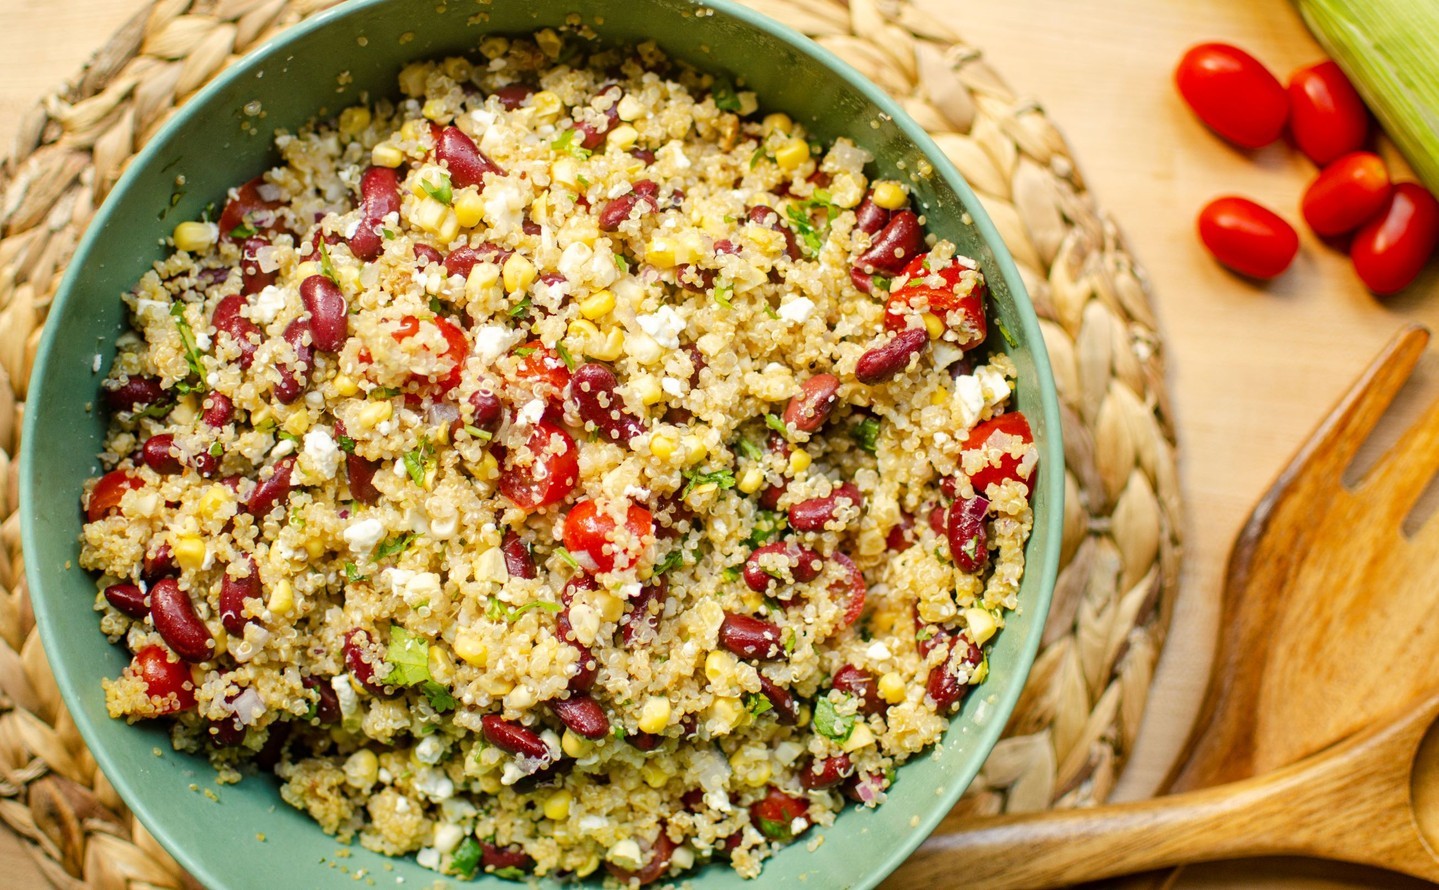 We are excited to share this new salad recipe with you from the kitchen of @livinglou!

You can’t go wrong with a fresh and bright quinoa salad with kidney beans, fresh corn, tomatoes and feta cheese. This is the perfect recipe to make on the weekend and enjoy for lunches throughout the week.

Get the recipe: https://bit.ly/3JIehwK

#LoveCDNBeans #betterwithbeans #ontariobeans #kidneybeans #beansalad